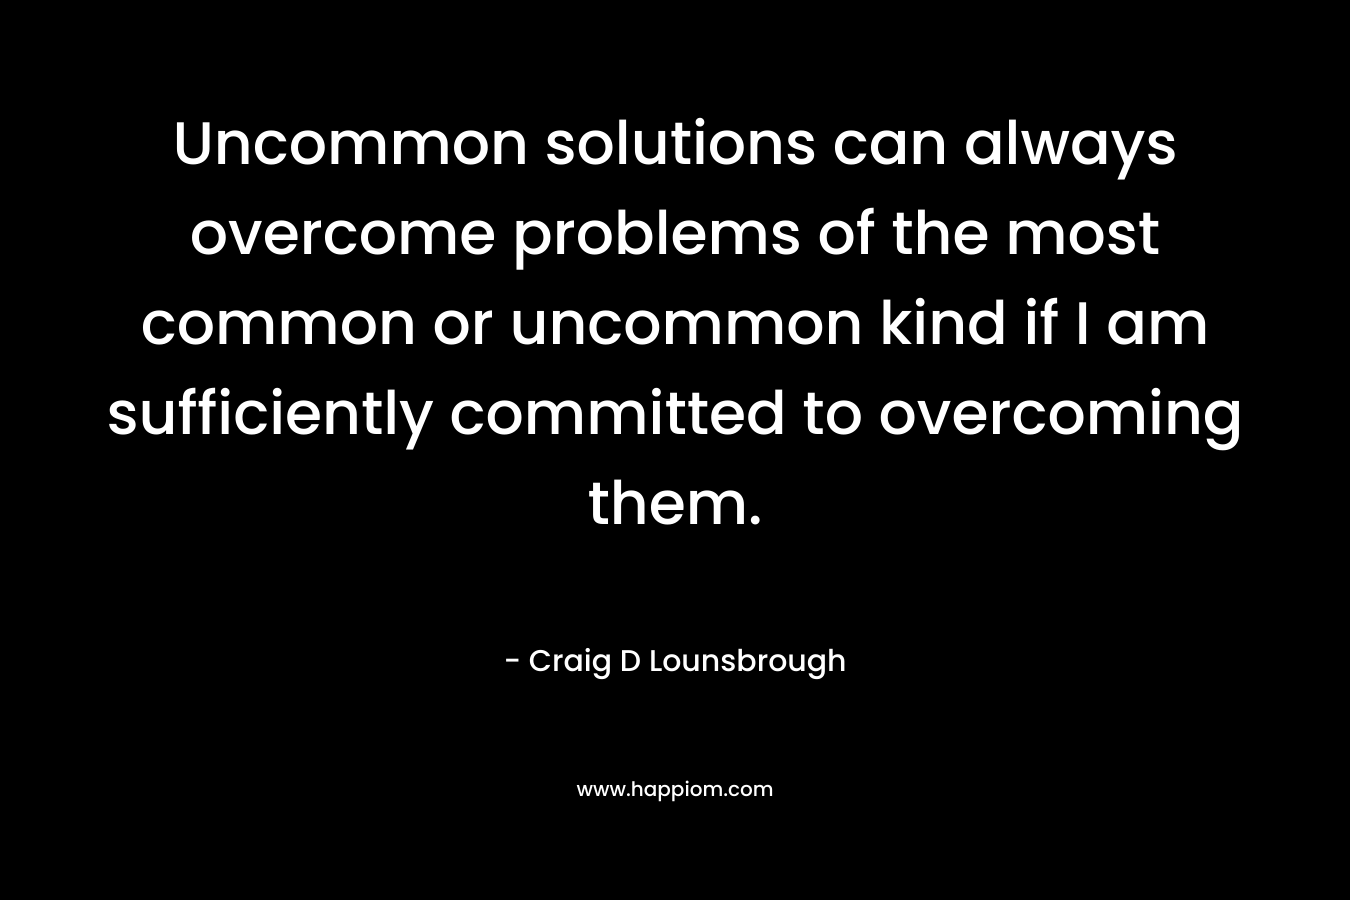 Uncommon solutions can always overcome problems of the most common or uncommon kind if I am sufficiently committed to overcoming them.